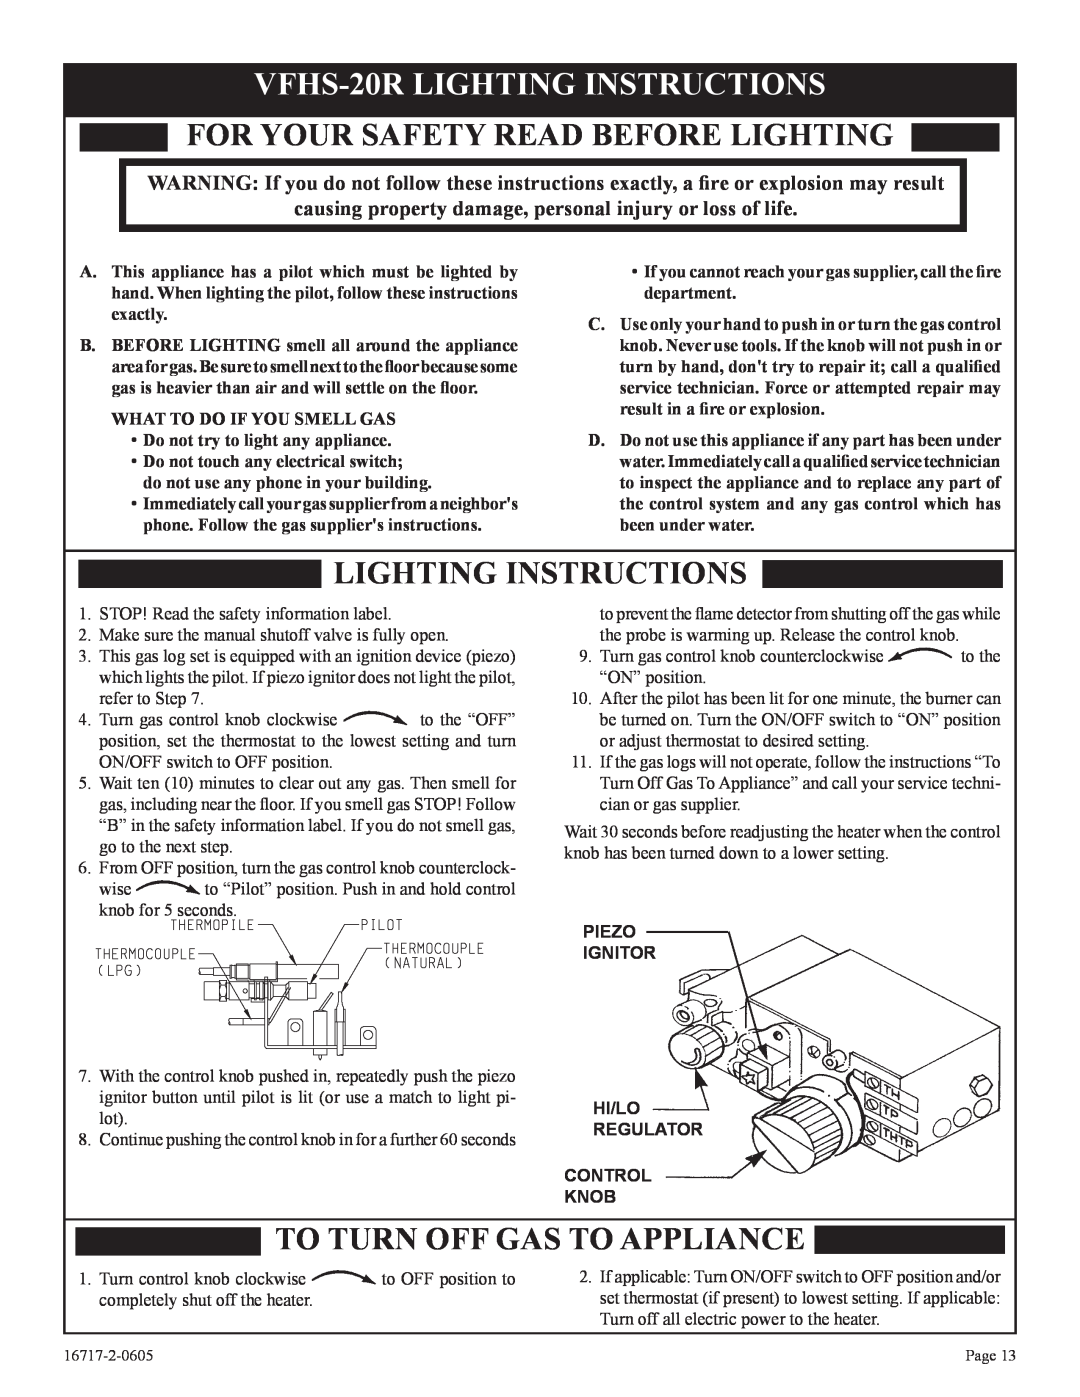 Empire Comfort Systems VFHS-20/10T-4, VFHS-20R-4 VFHS-20RLIGHTING INSTRUCTIONS, For Your Safety Read Before Lighting 